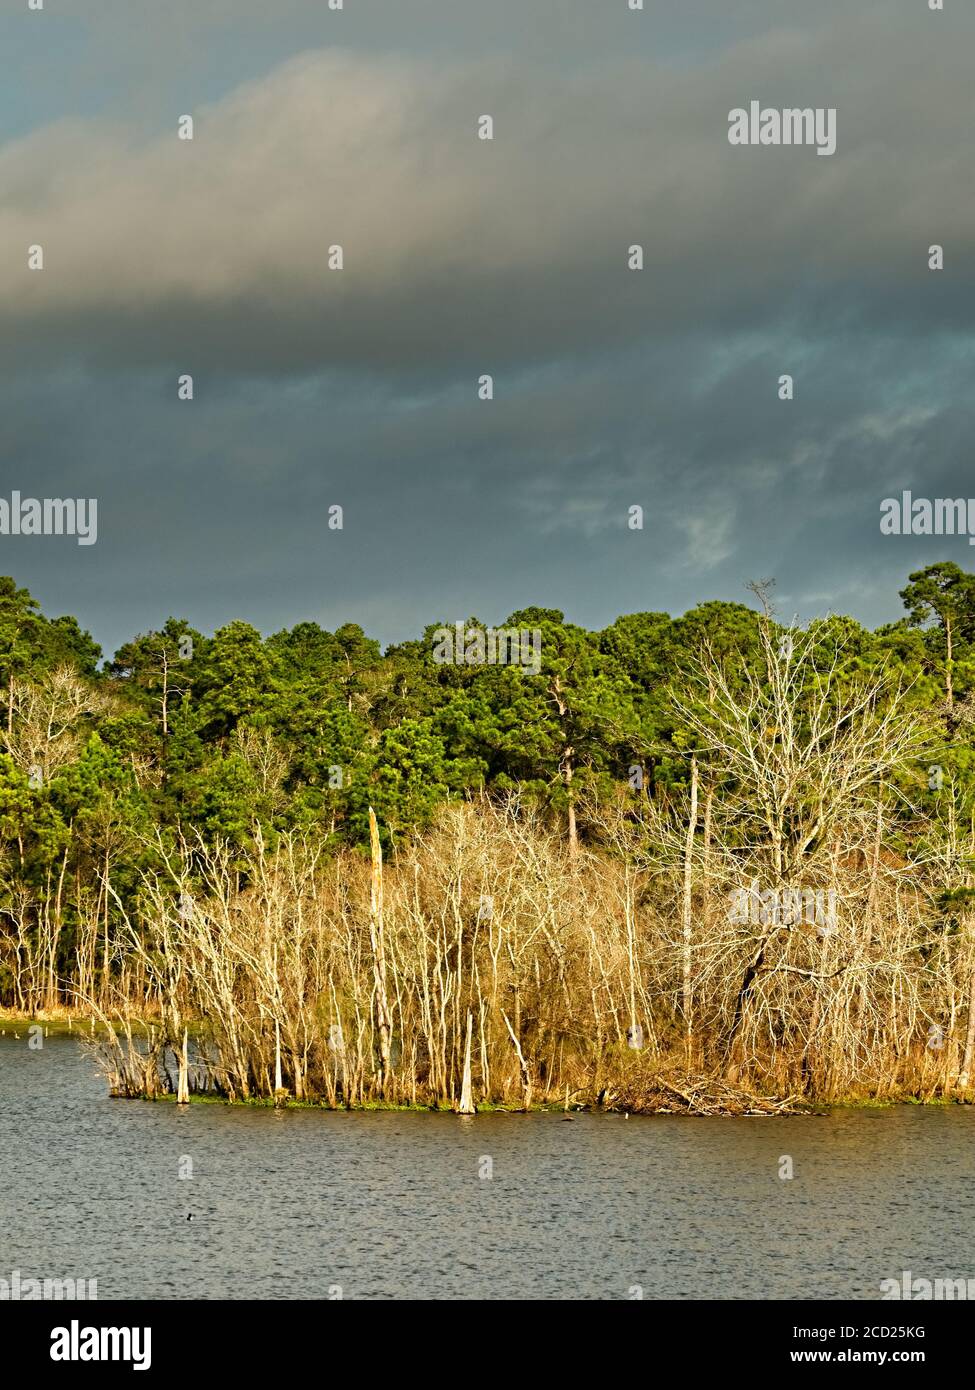 The Woodlands TX USA - 01-20-2020 - Winter Woods by See Stockfoto